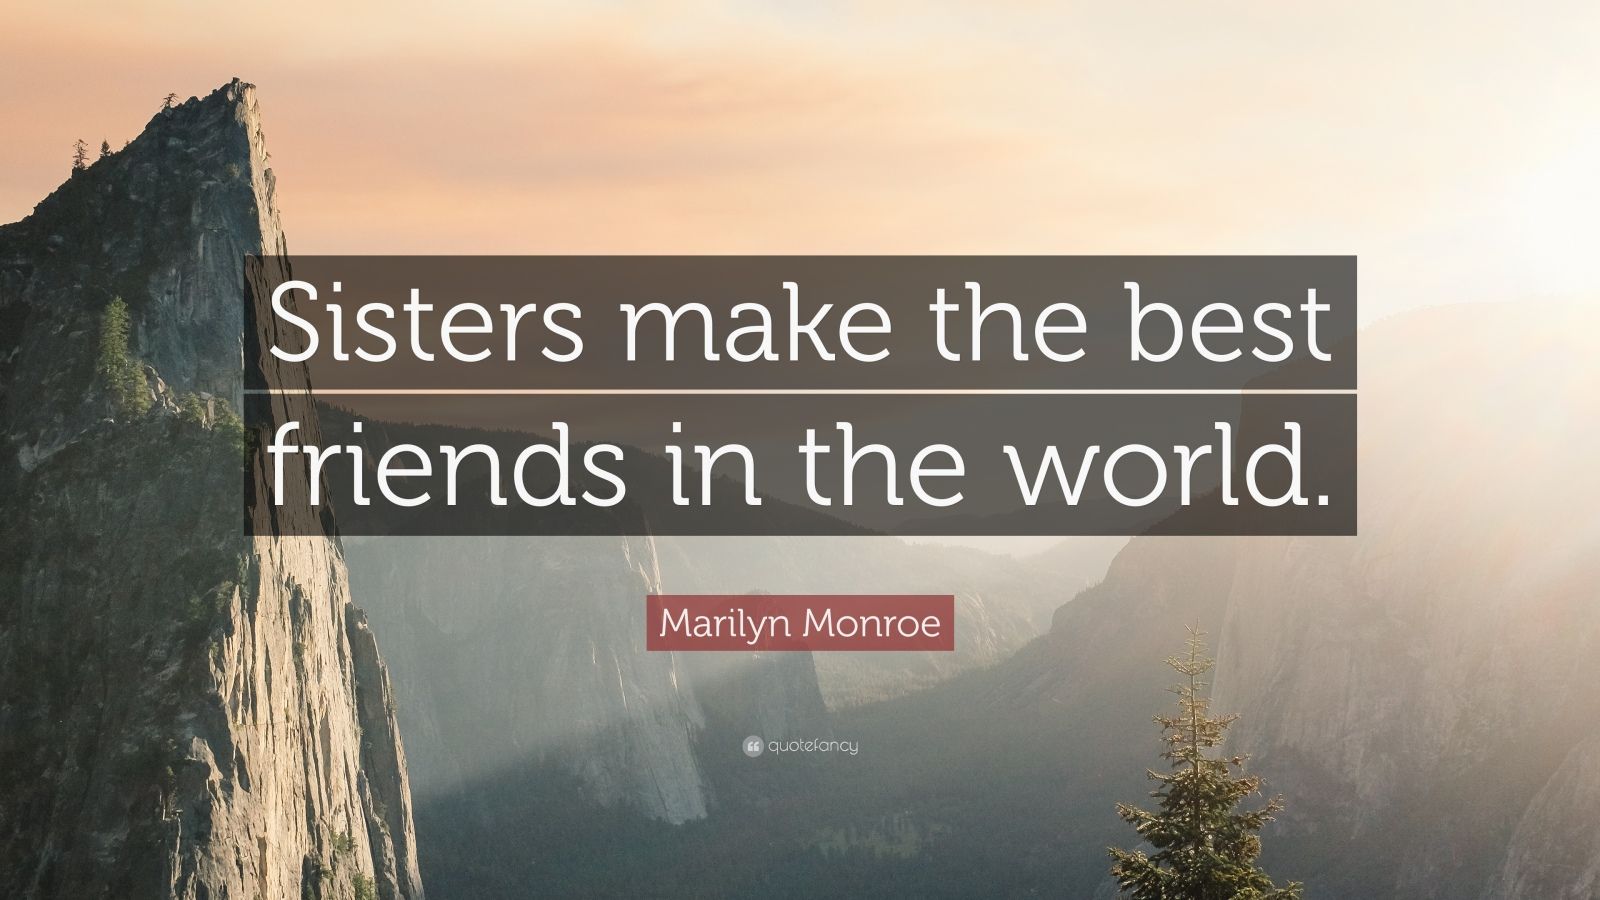 Marilyn Monroe Quote: "Sisters make the best friends in ...